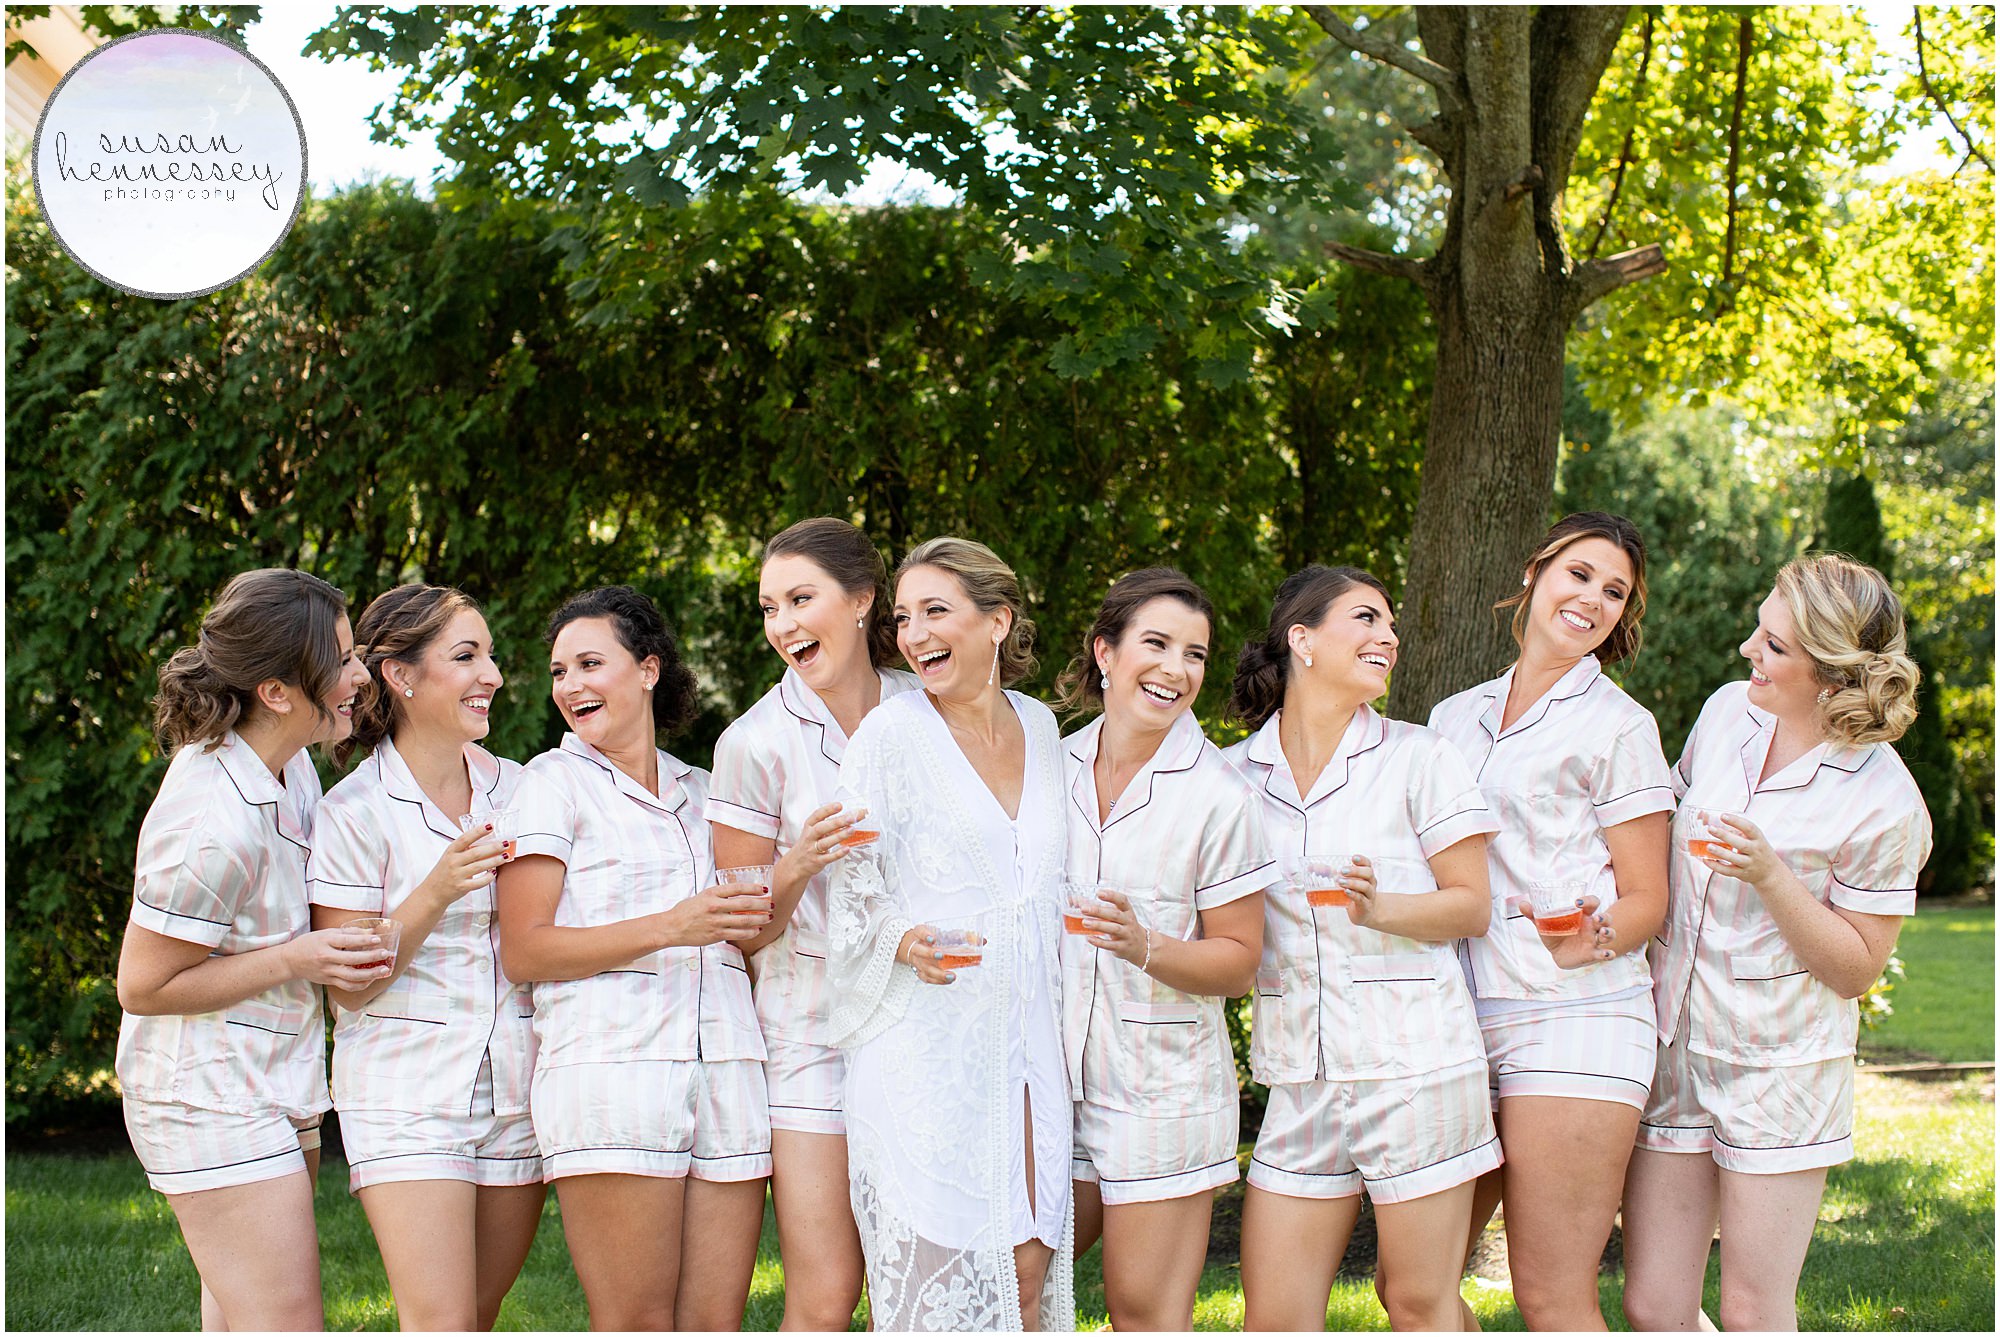 Bride and bridesmaids drink champagne in matching pajamas.